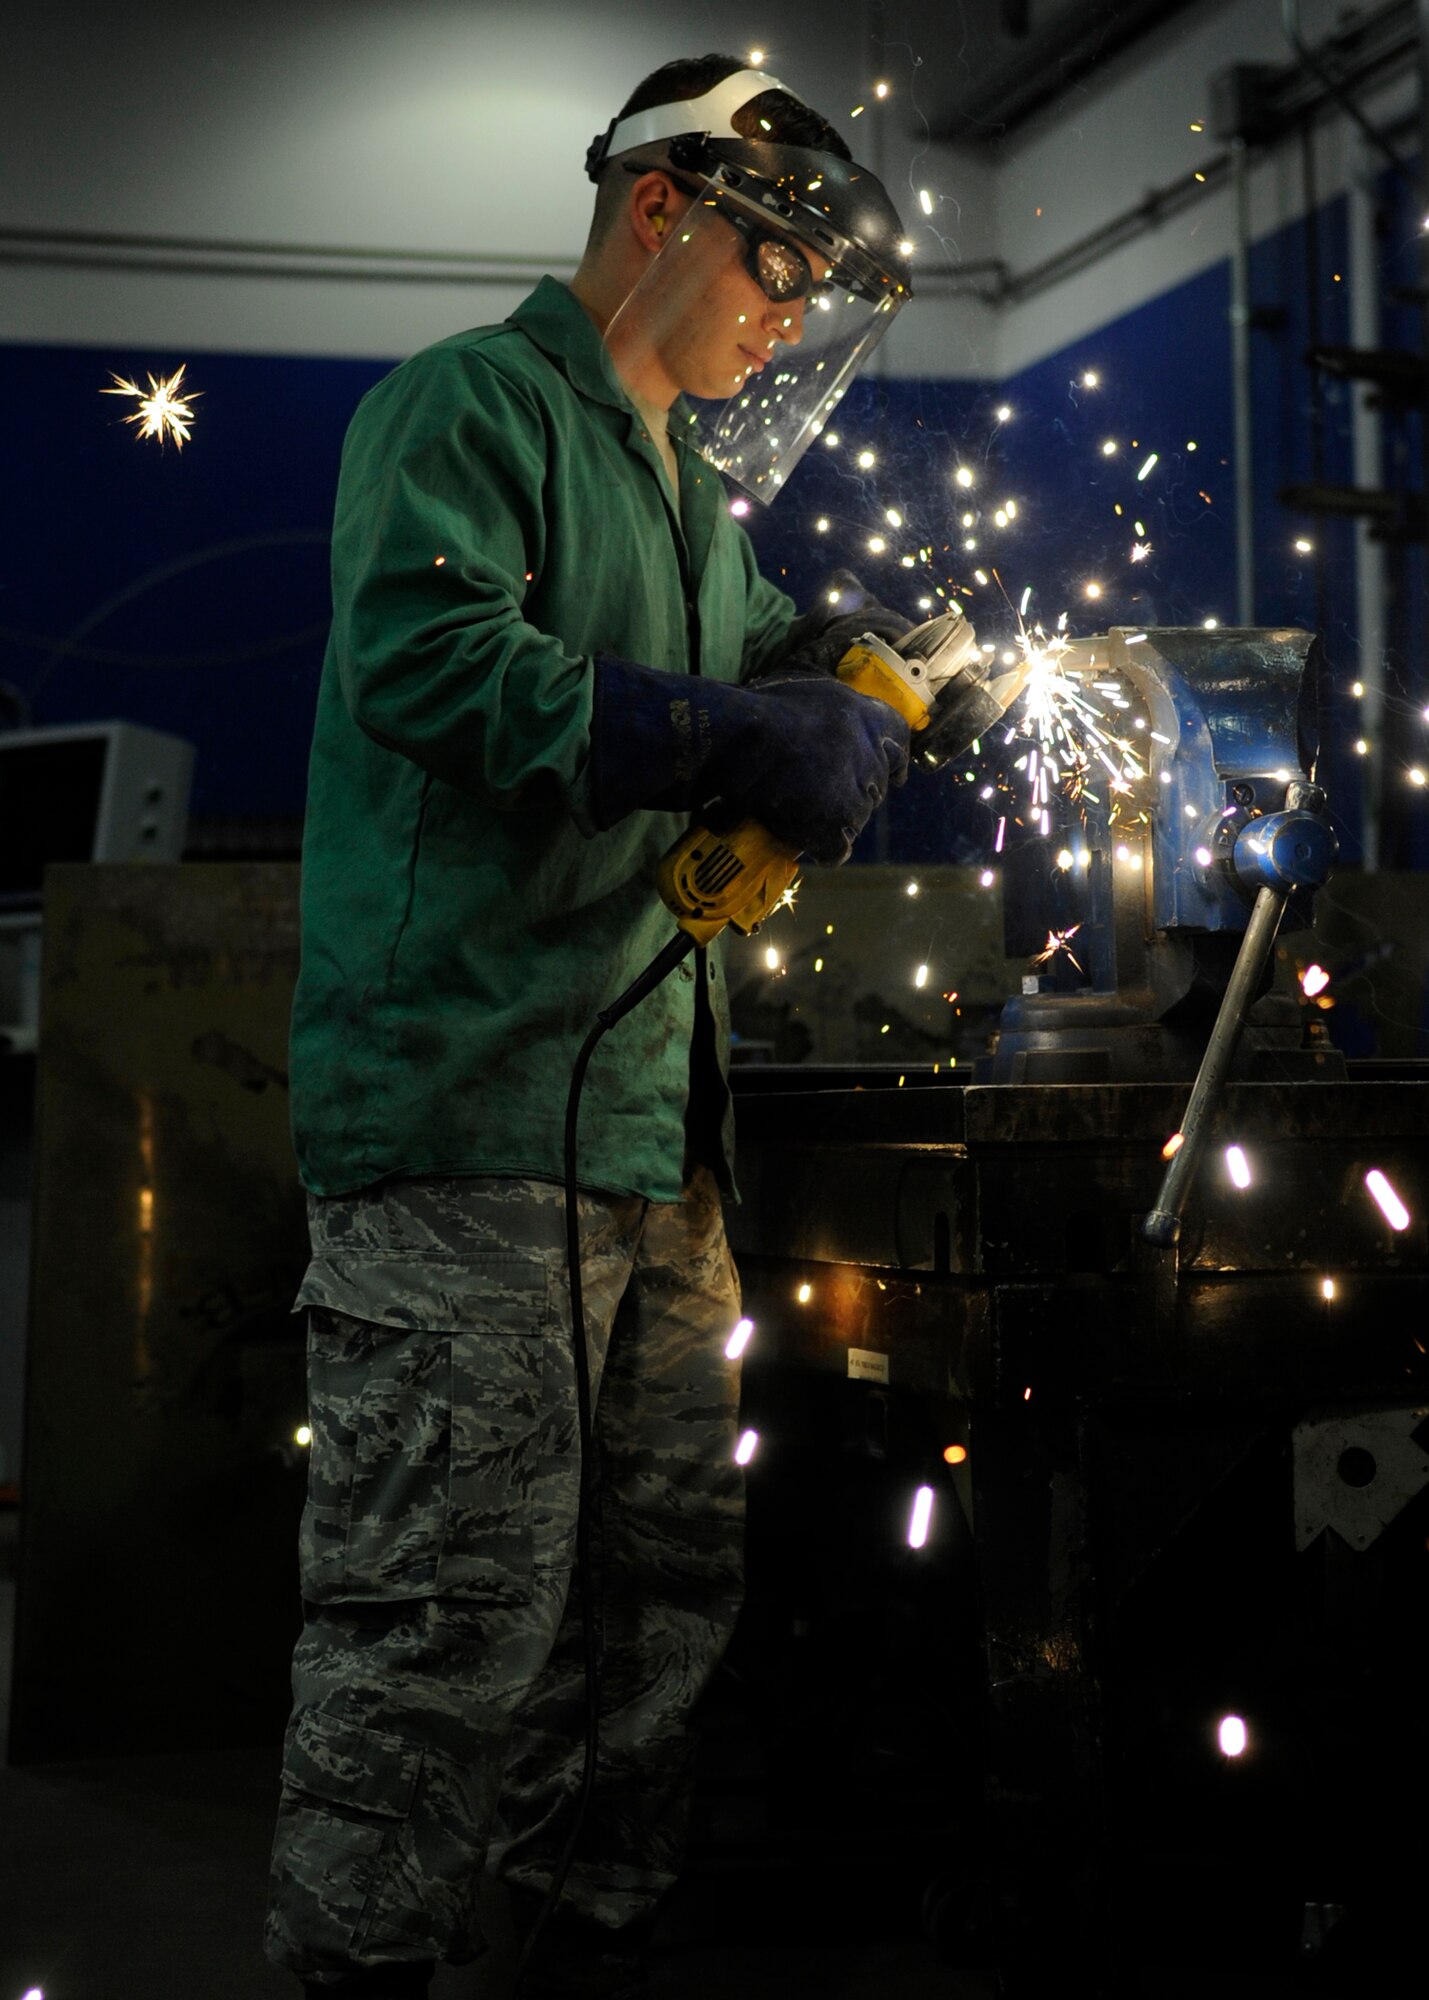 U.S. Air Force Senior Airman Robert Mason, 354th Maintenance Squadron metals technology journeyman, grinds a piece of titanium while fabricating a part for an F-16 Fighting Falcon at Eielson Air Force Base, Alaska, July 22, 2013. Metals tech Airmen use practically any metal to fabricate parts and tools for machinery base wide. (U.S. Air Force Senior Airman Shawn Nickel/Released)